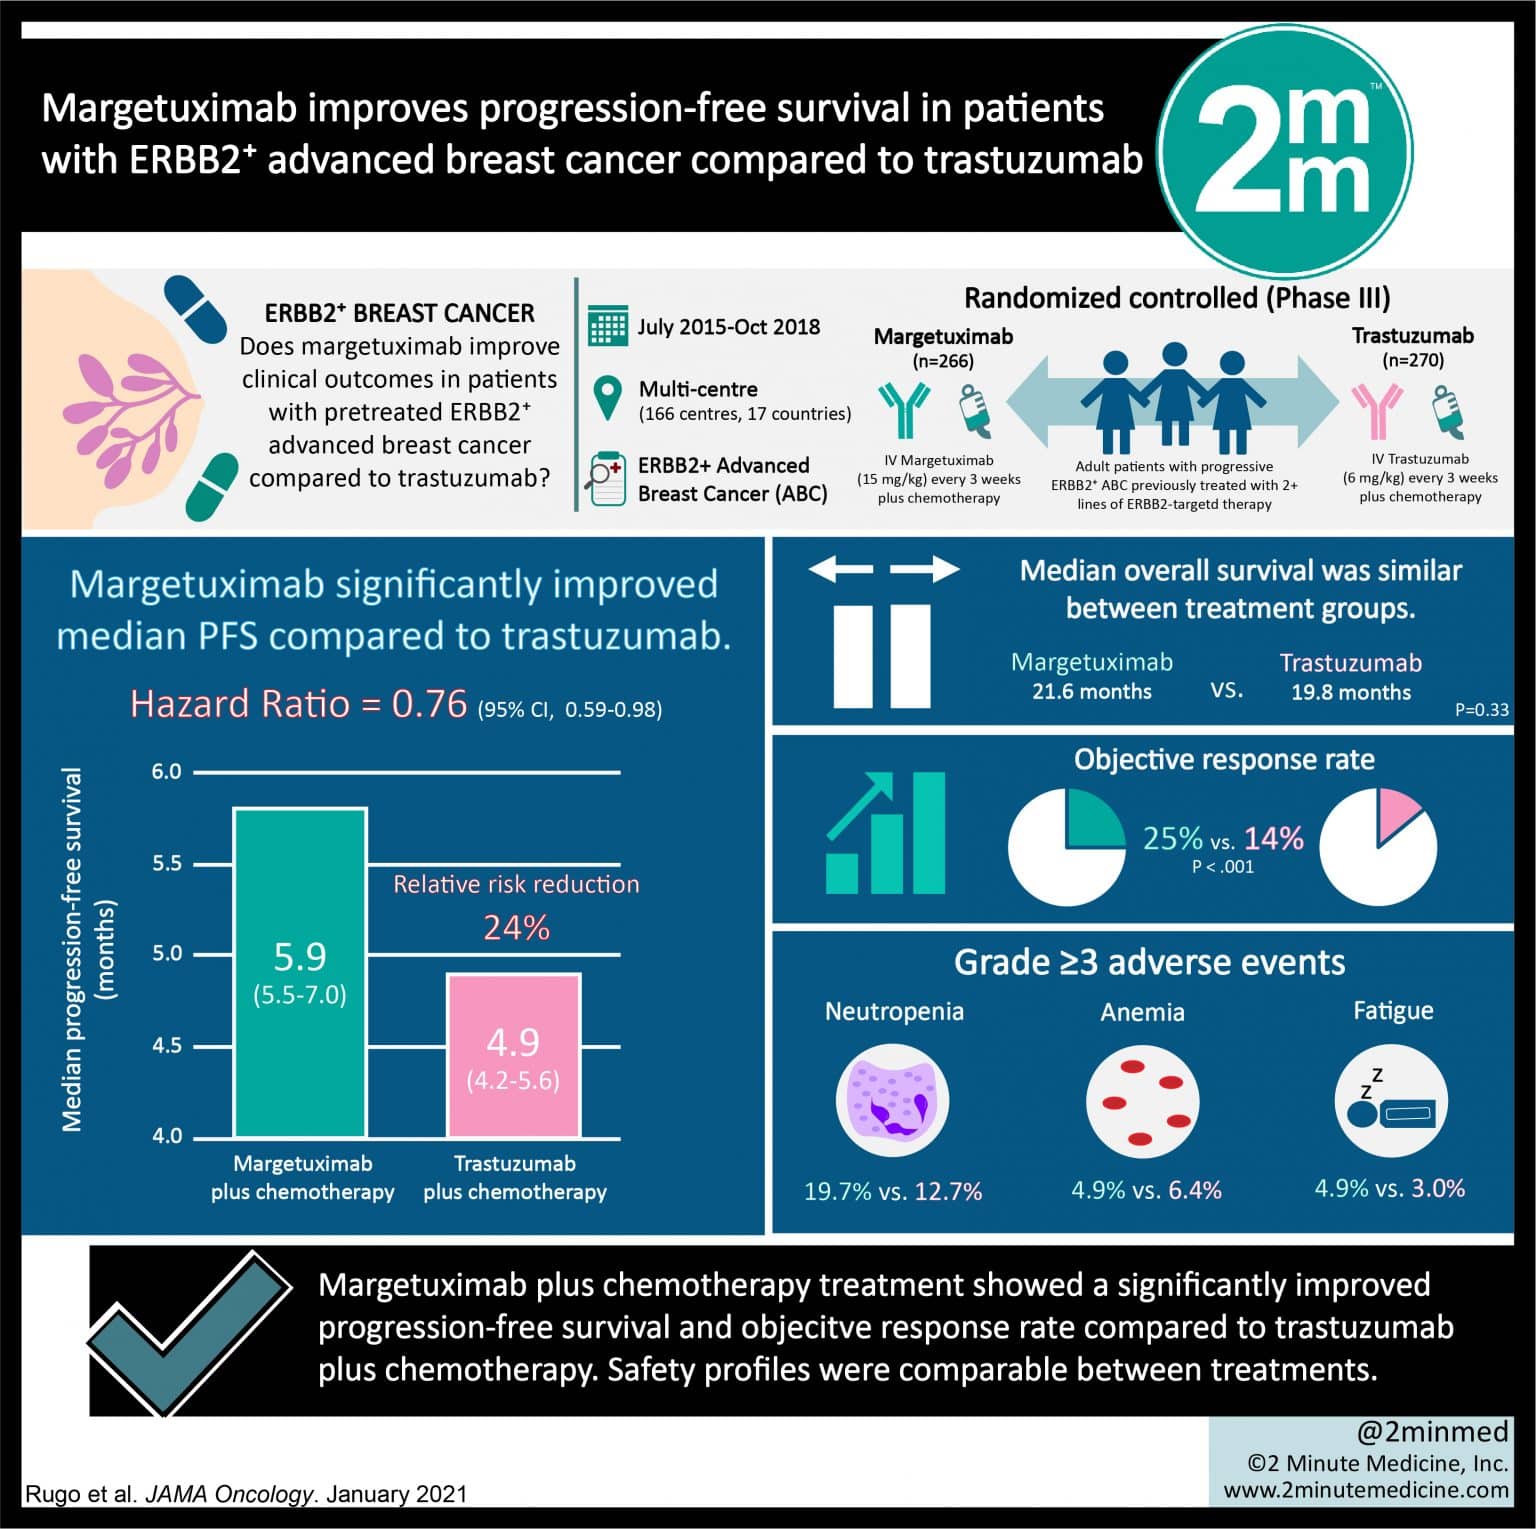 #VisualAbstract: Margetuximab improves progression